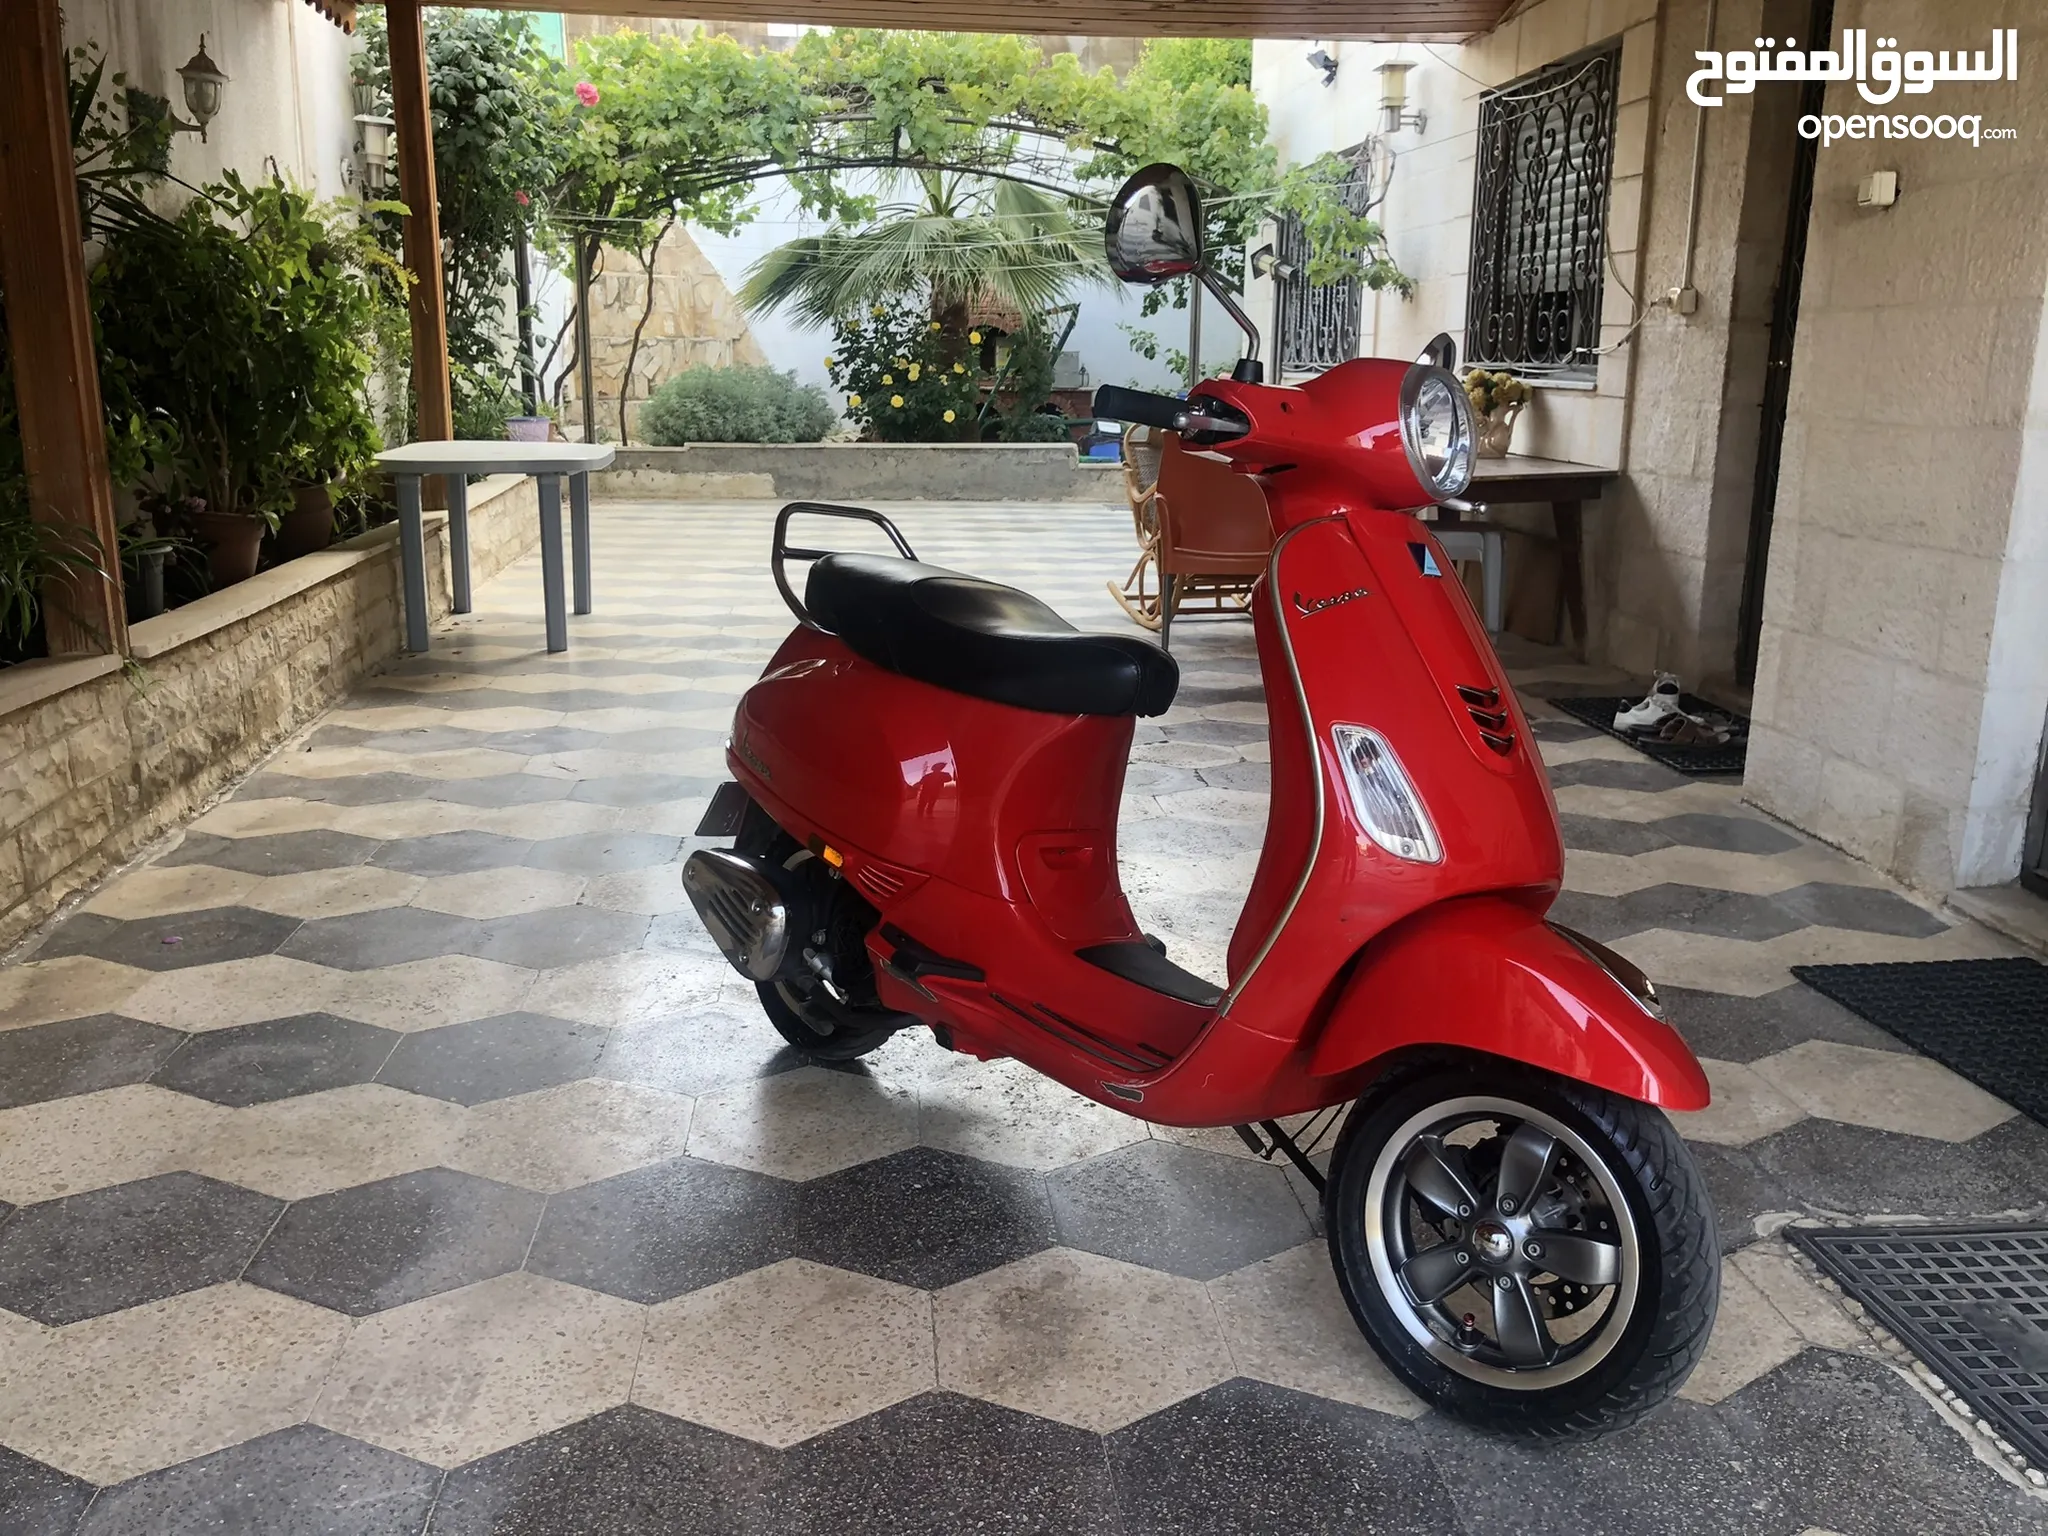 Vespa Motorcycles For Sale in Jordan: Used & New: Best Prices | OpenSooq